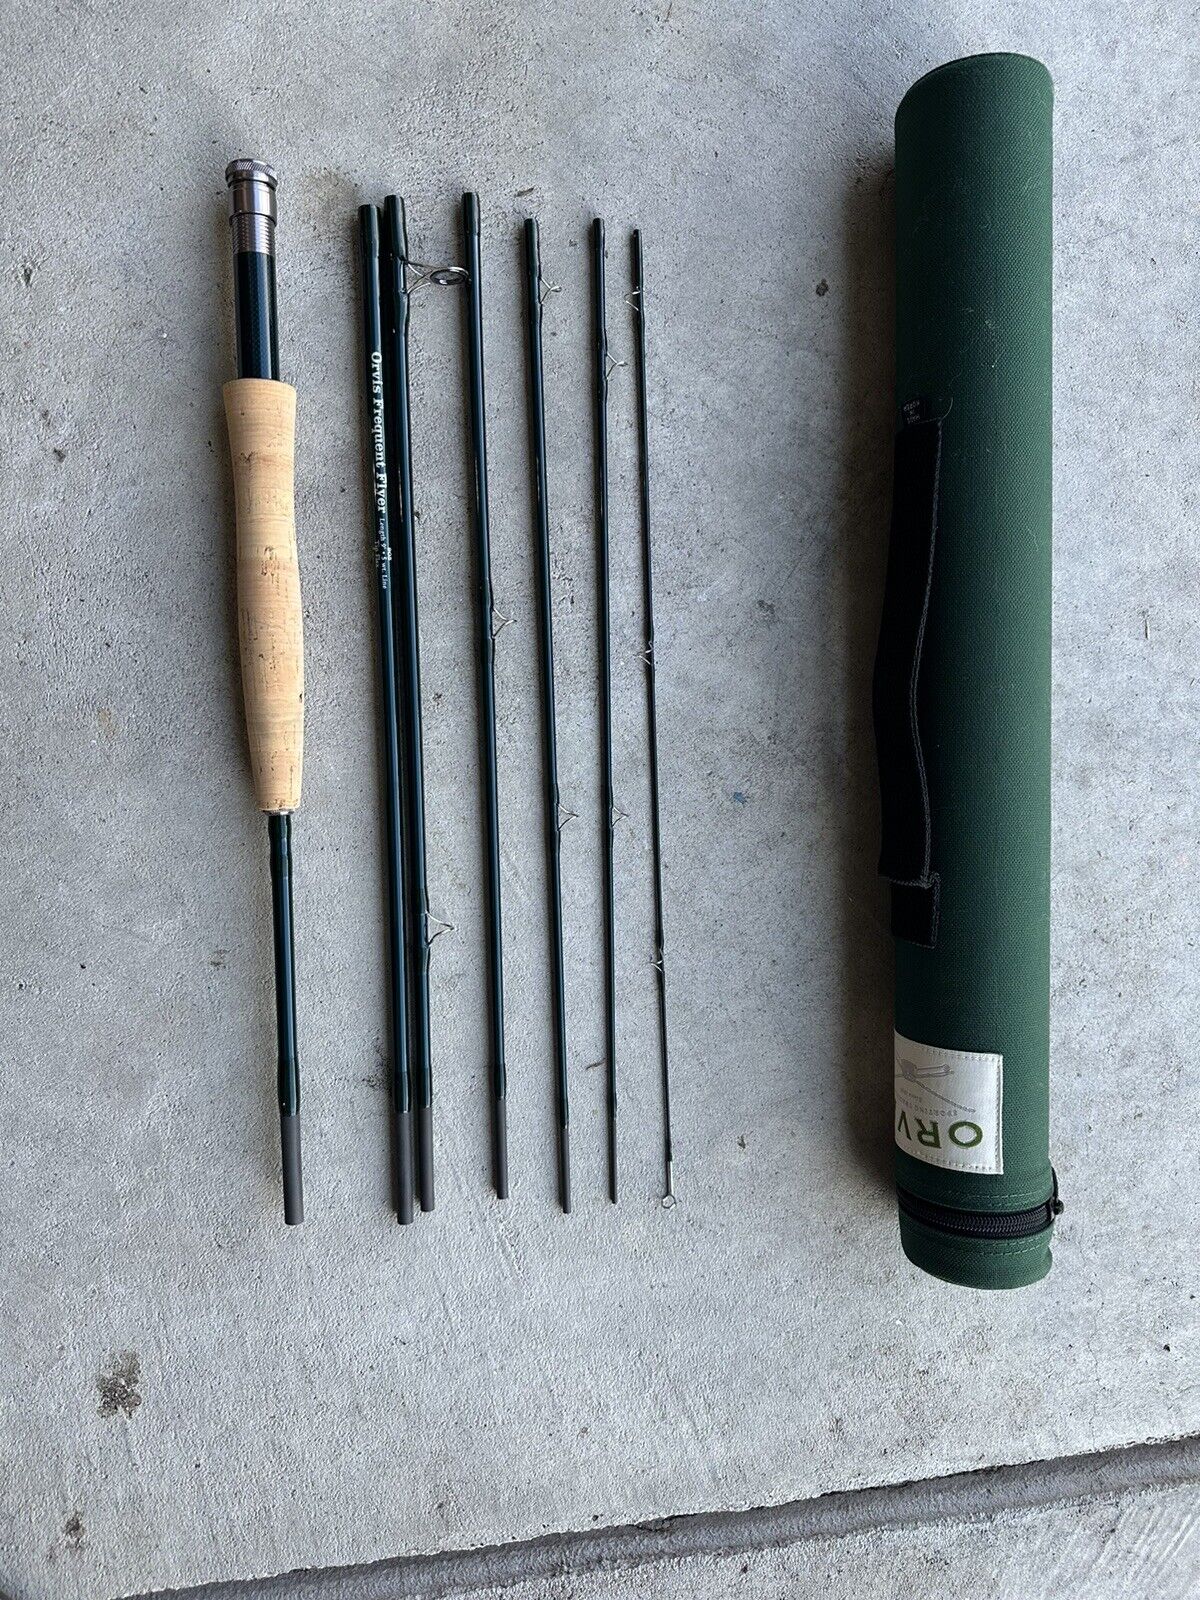 Orvis Frequent Flyer 5wt 7pc Fly Fishing Rod Orvis Orvis Frequent Flyer 5wt